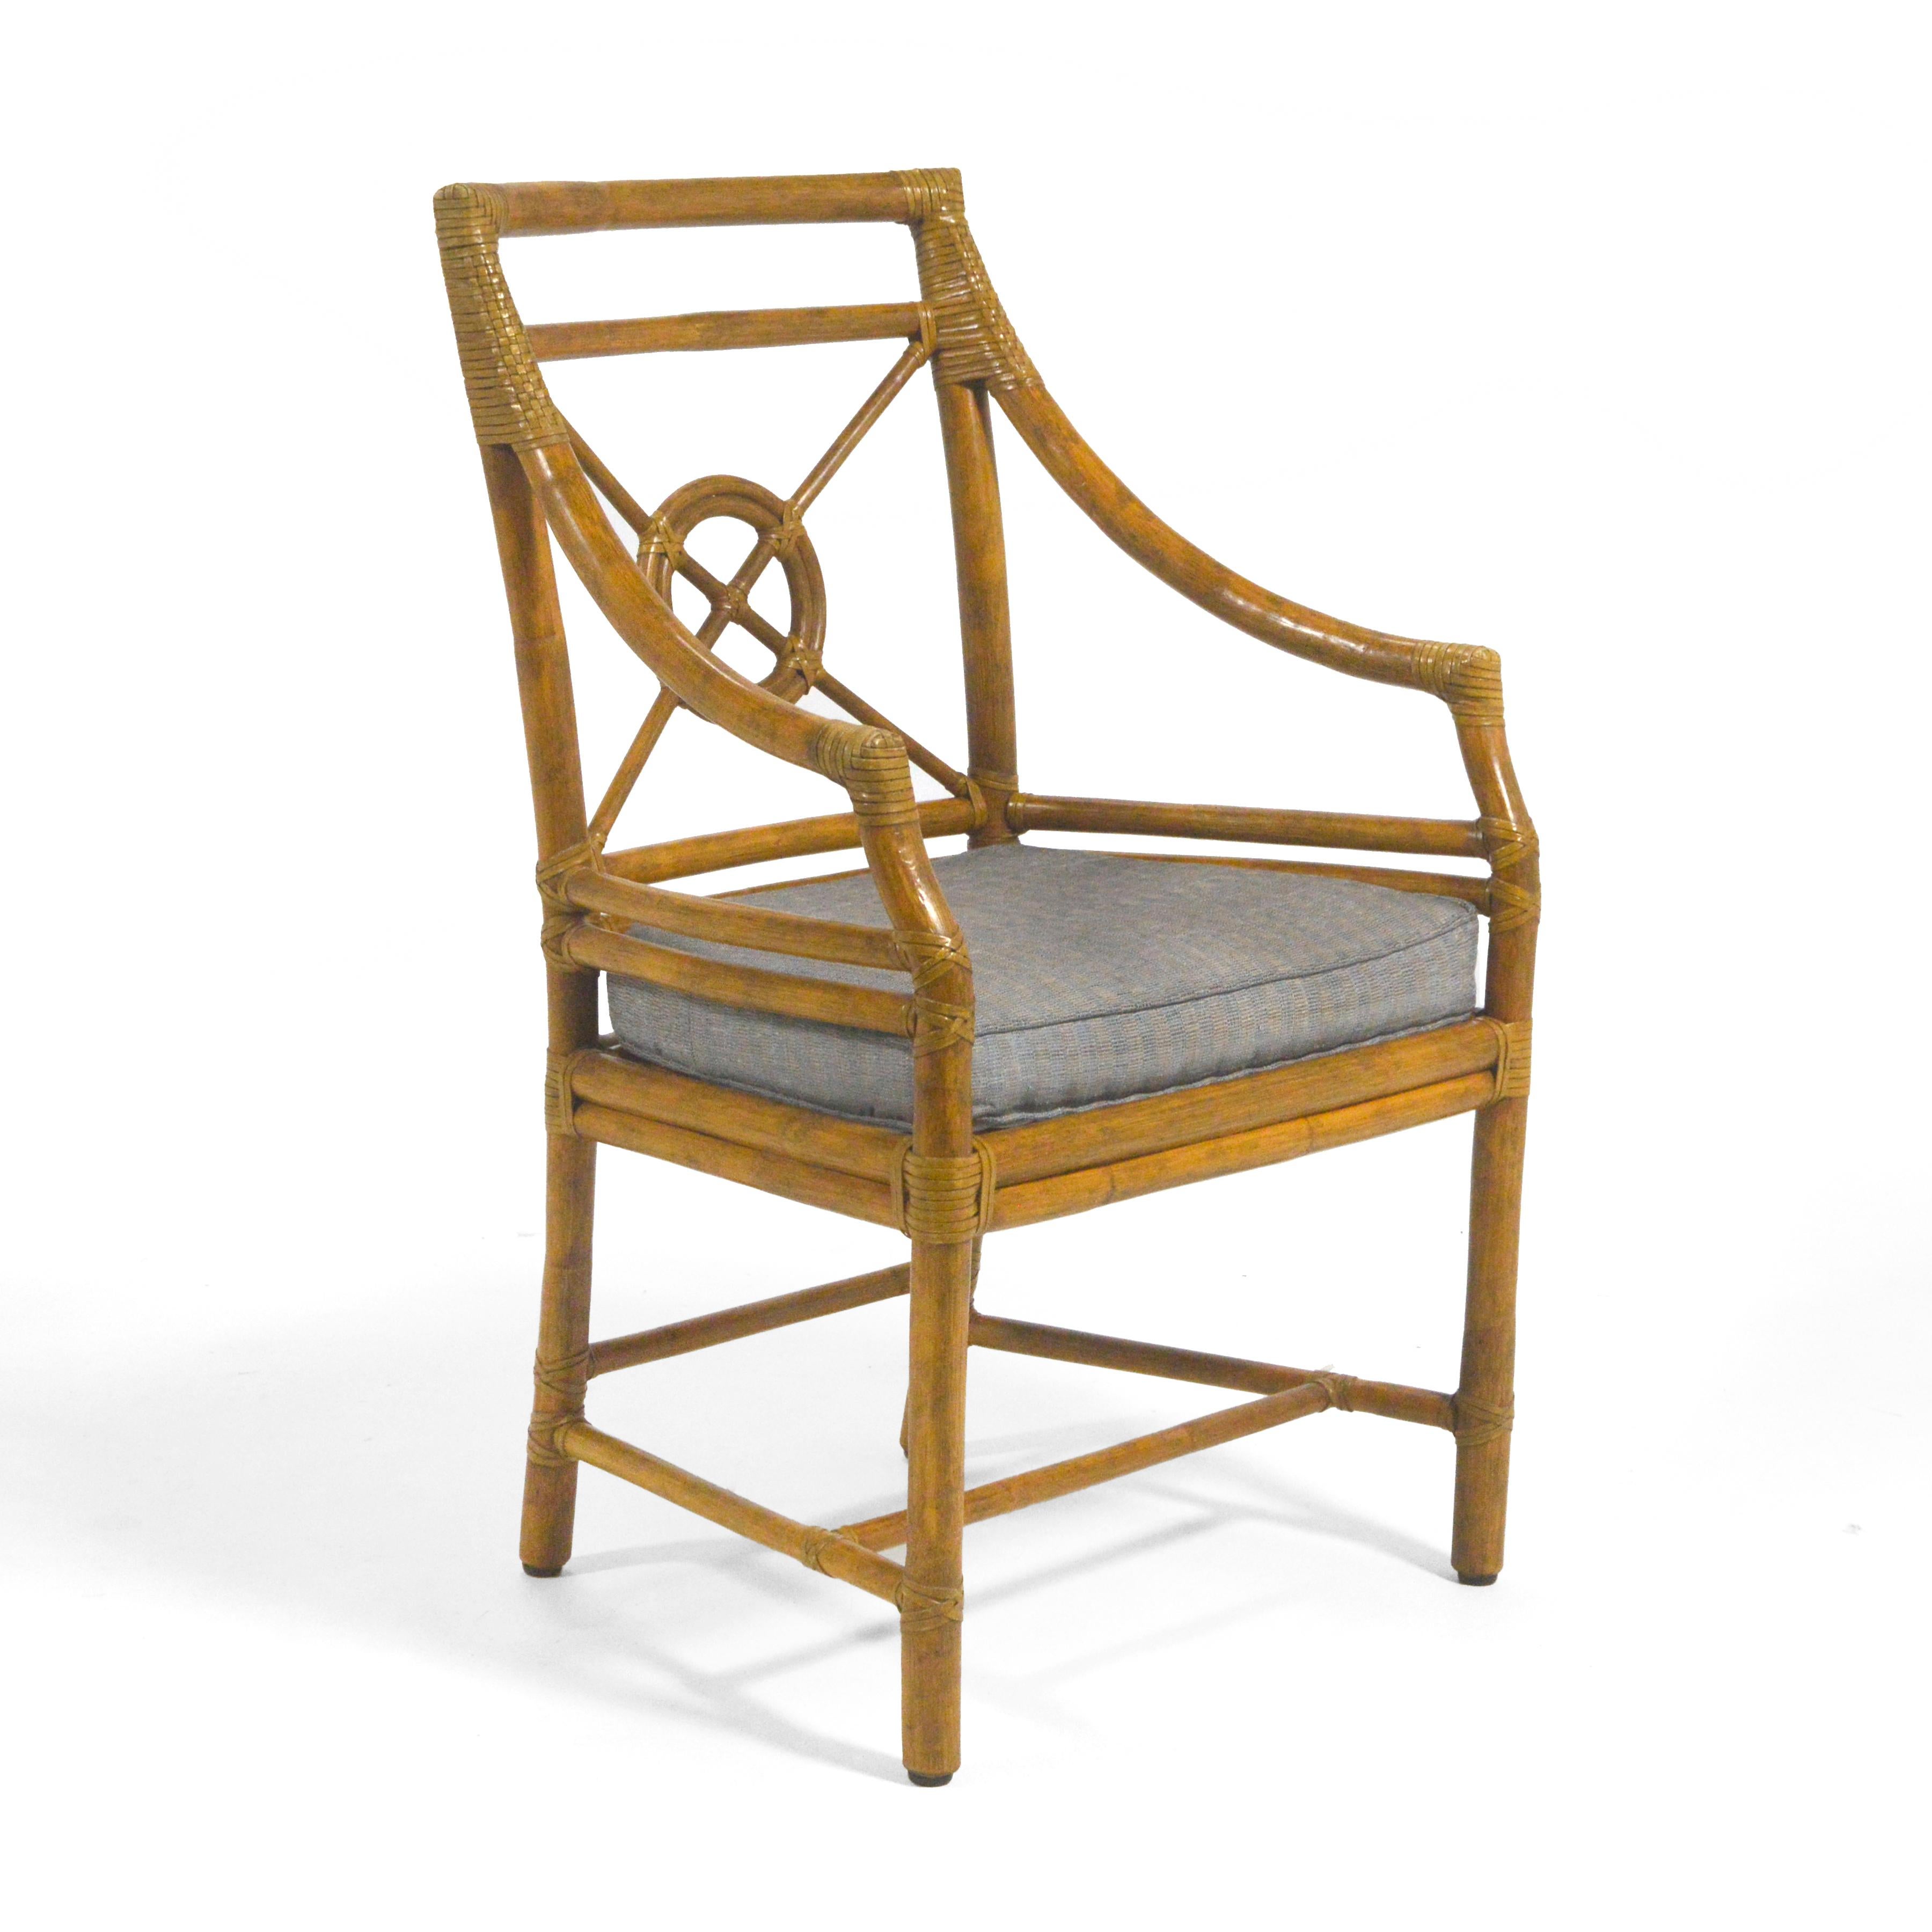 Elinor McGuire designed this model M-59 occasional chair for McGuire of San Fransisco, the company she started with her husband John. Originally named the 